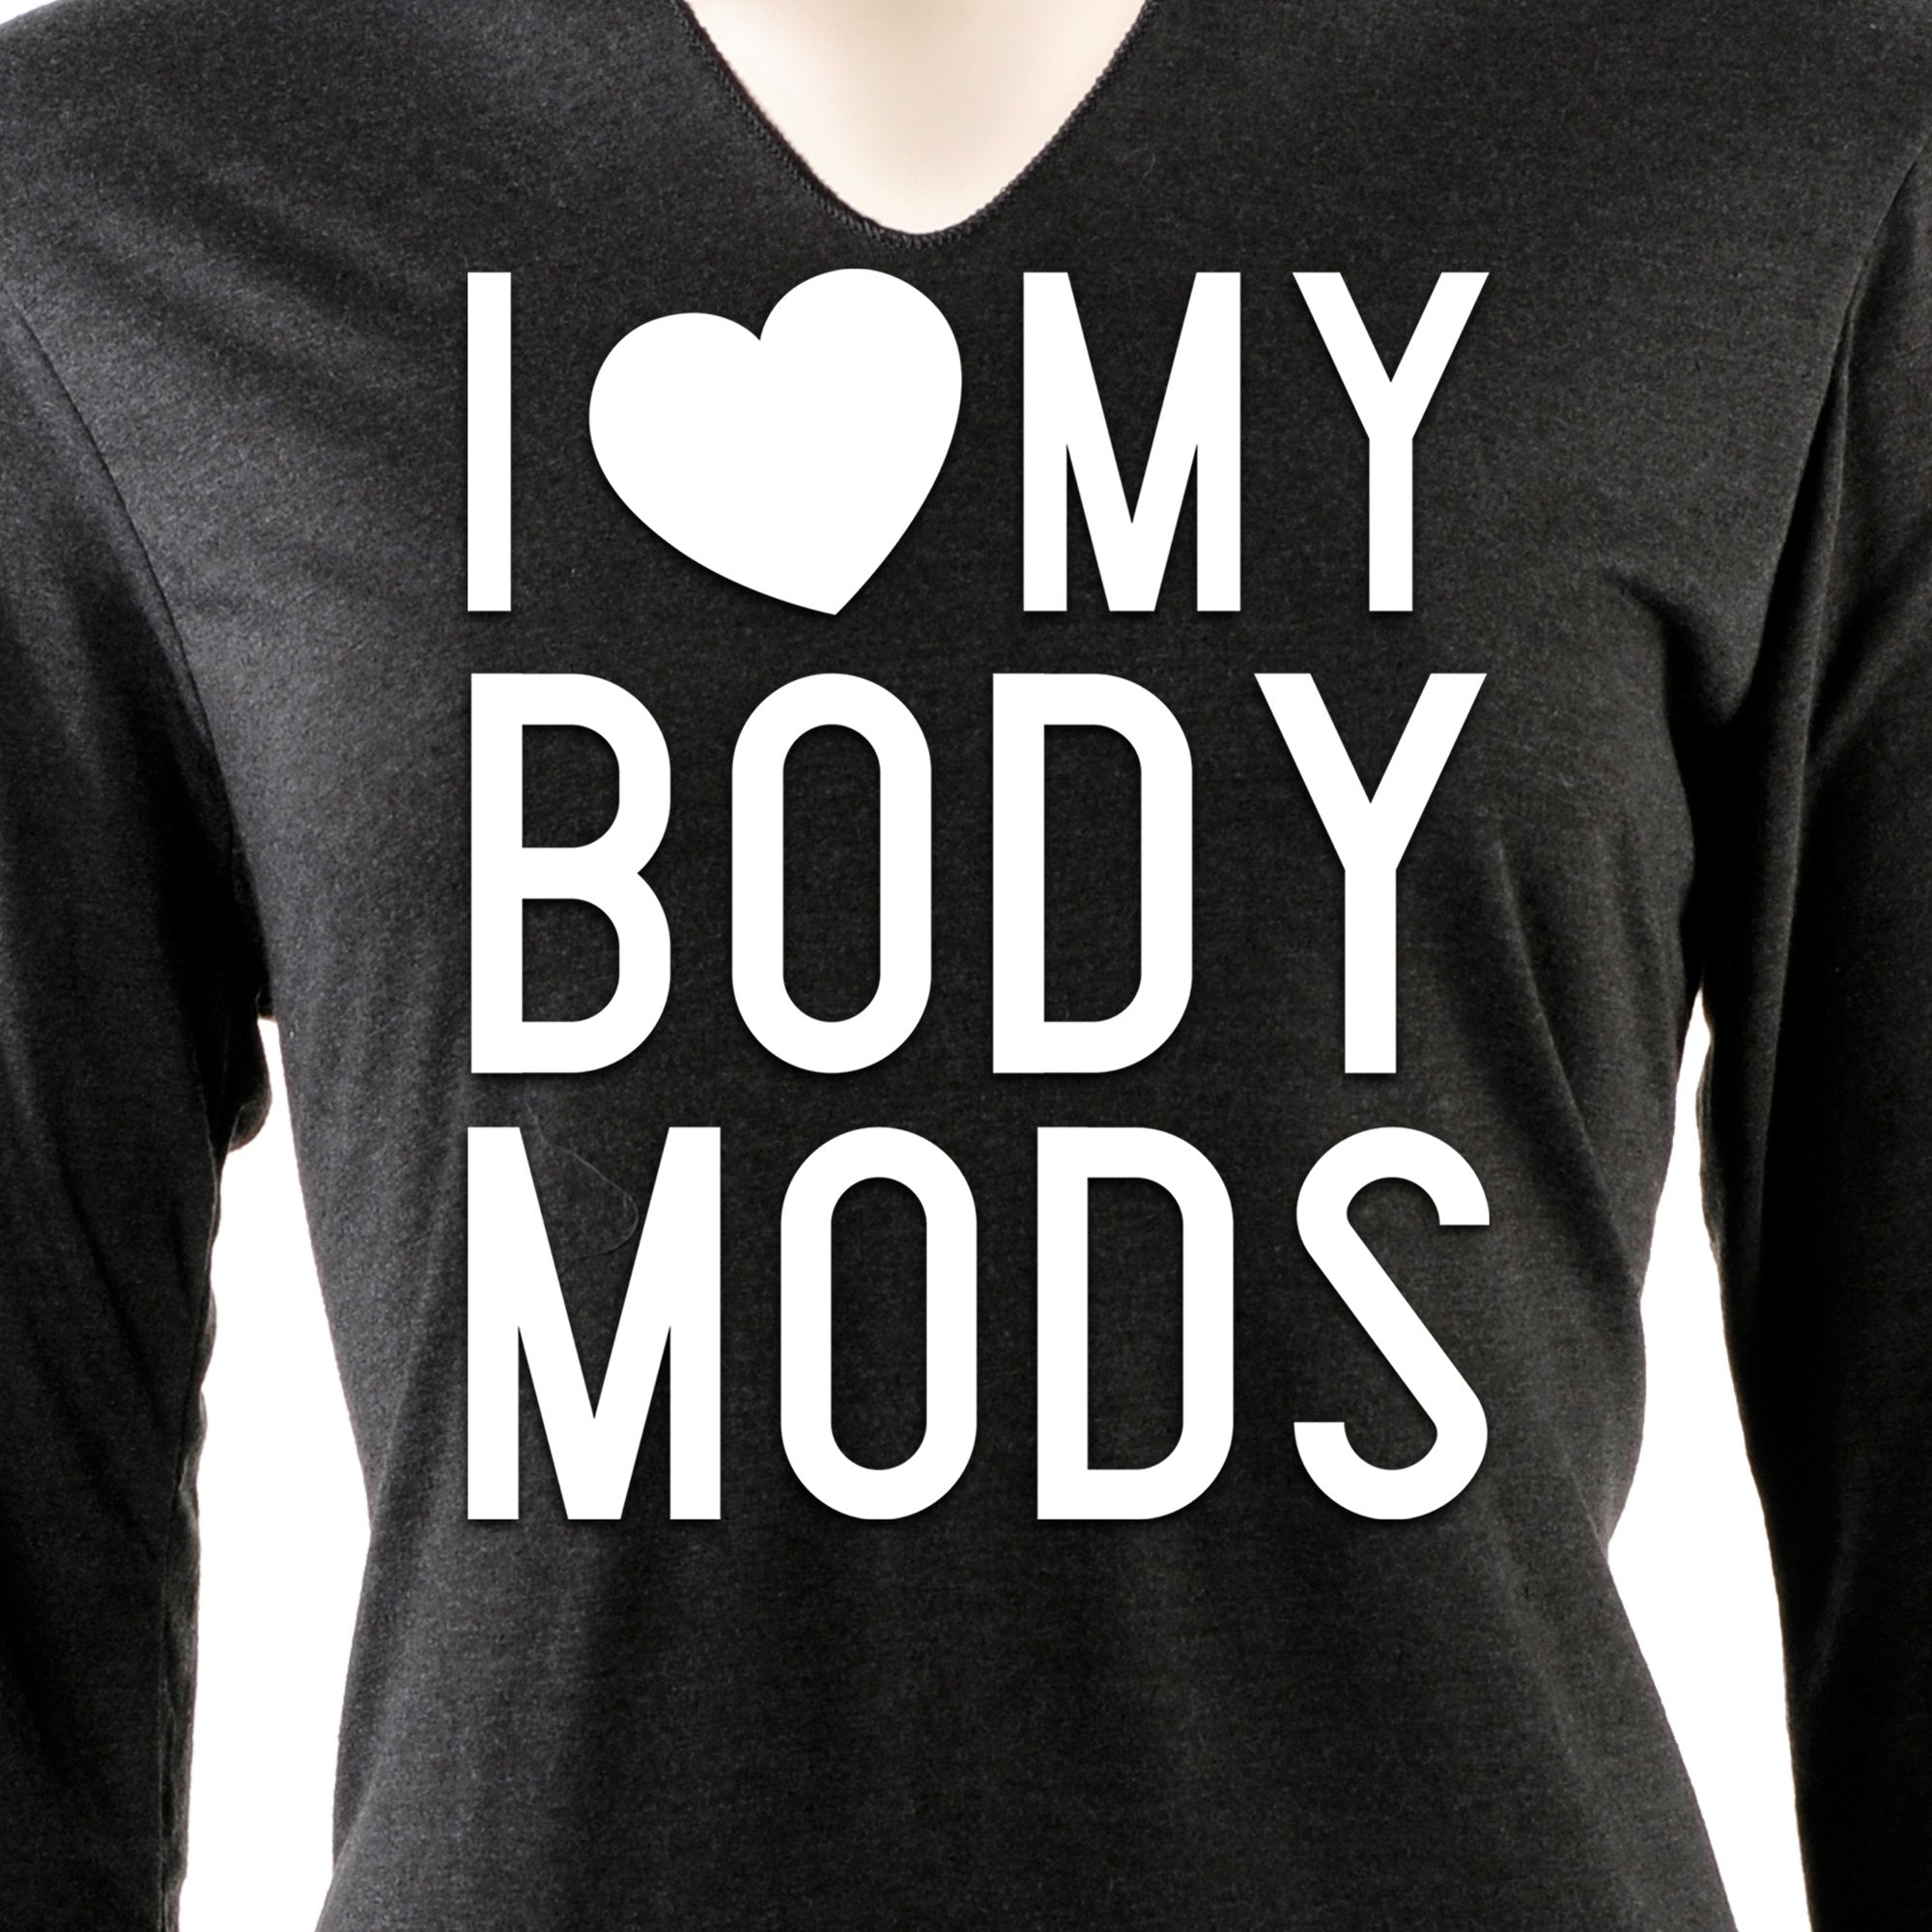 I Love My Body Mods Tapered Long Sleeve Hoodie